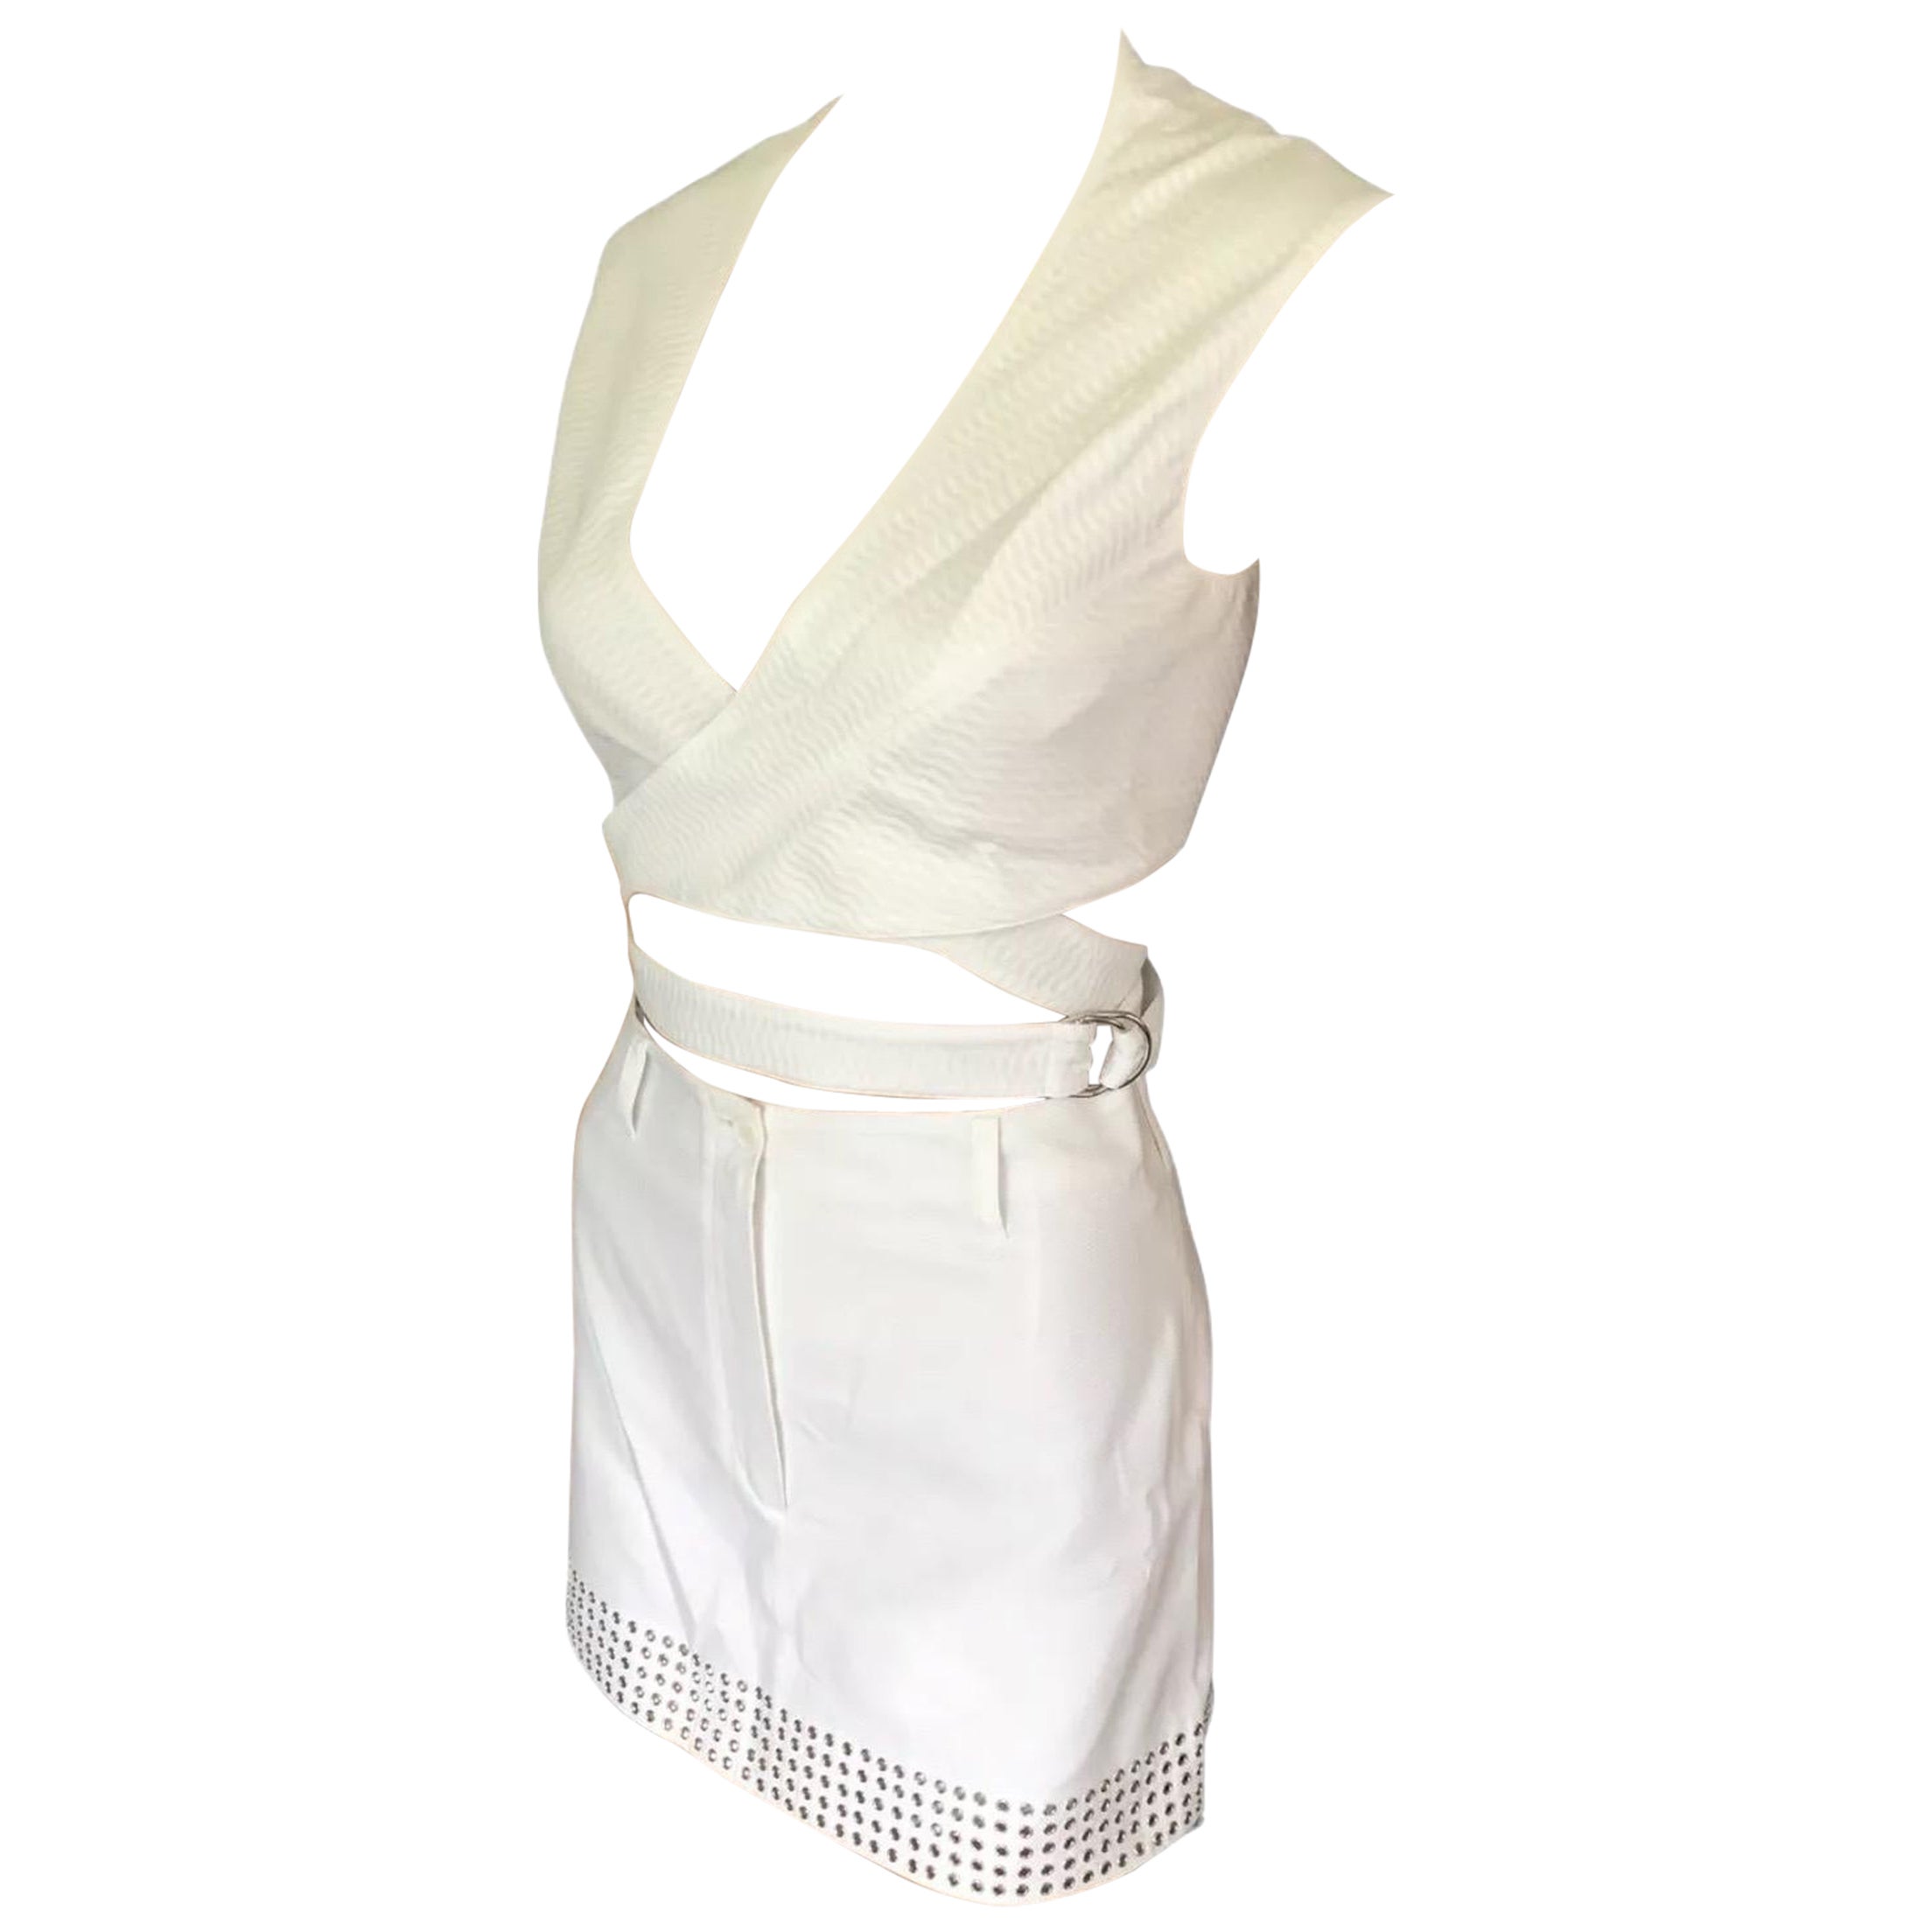 New Azzedine Alaia Embellished White Mini Skort Shorts and Bra Top 2 Piece Set For Sale